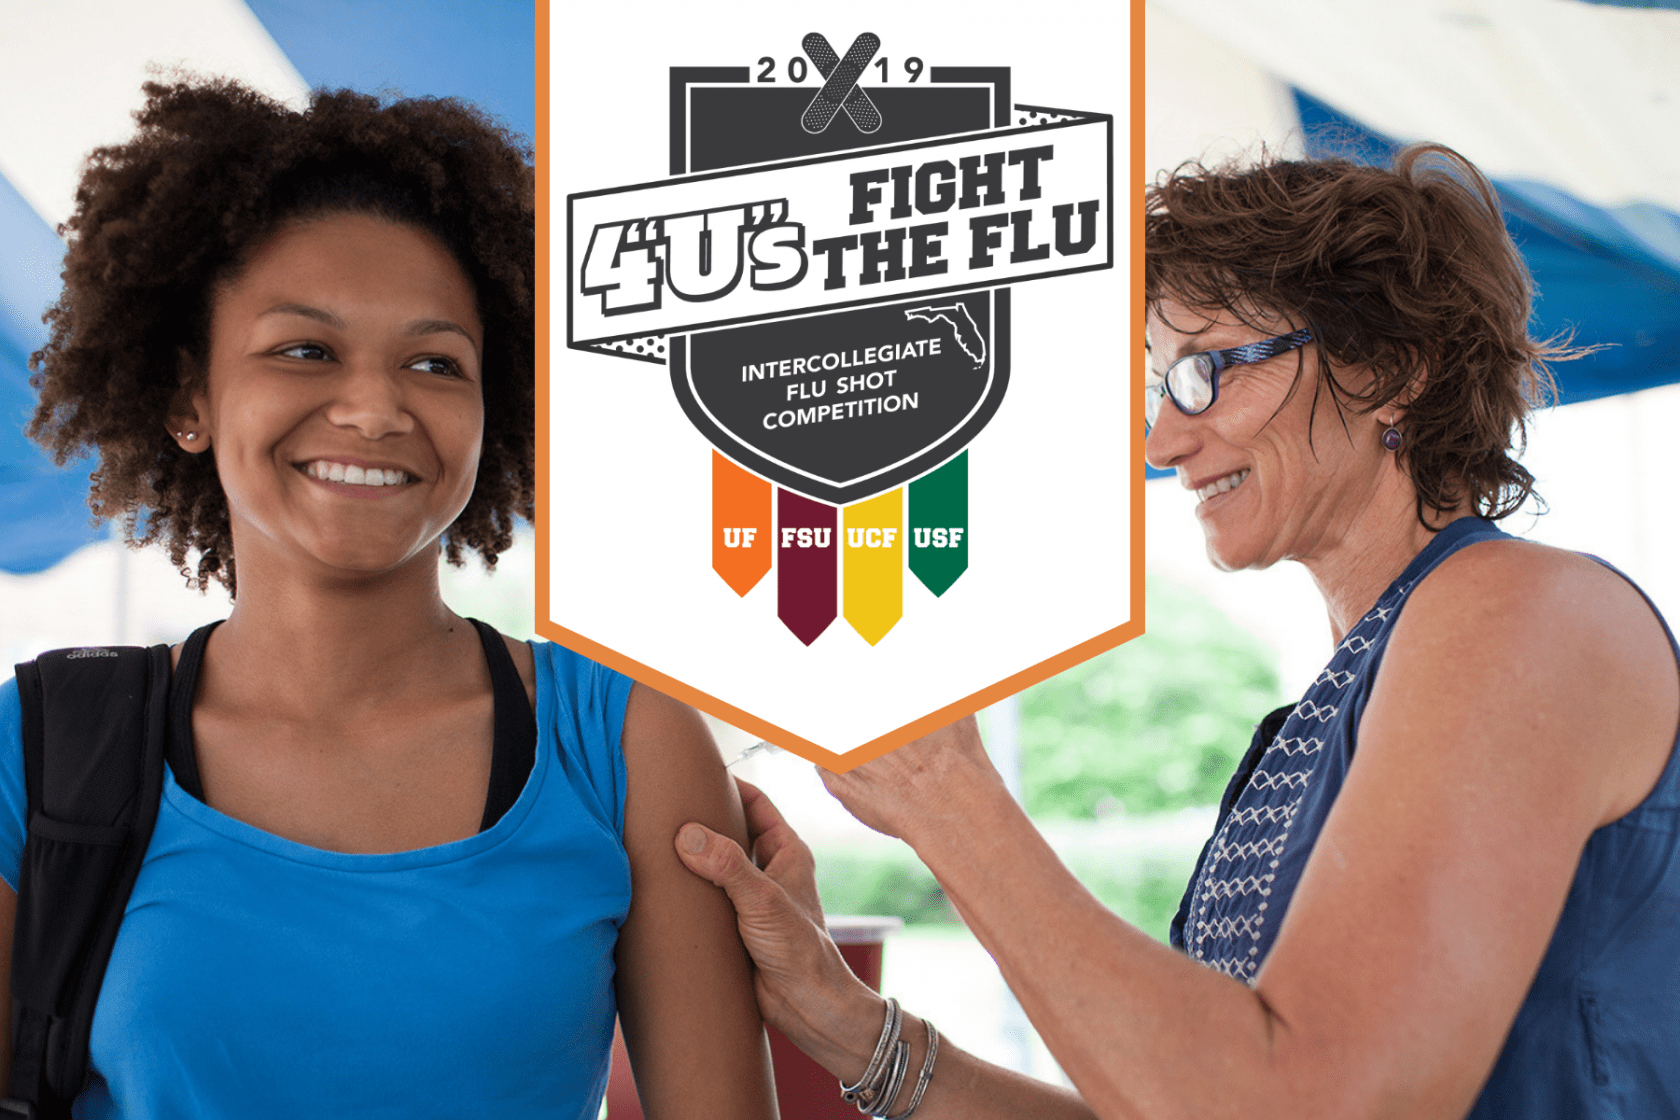 USF goes head-to-head in flu shot competition